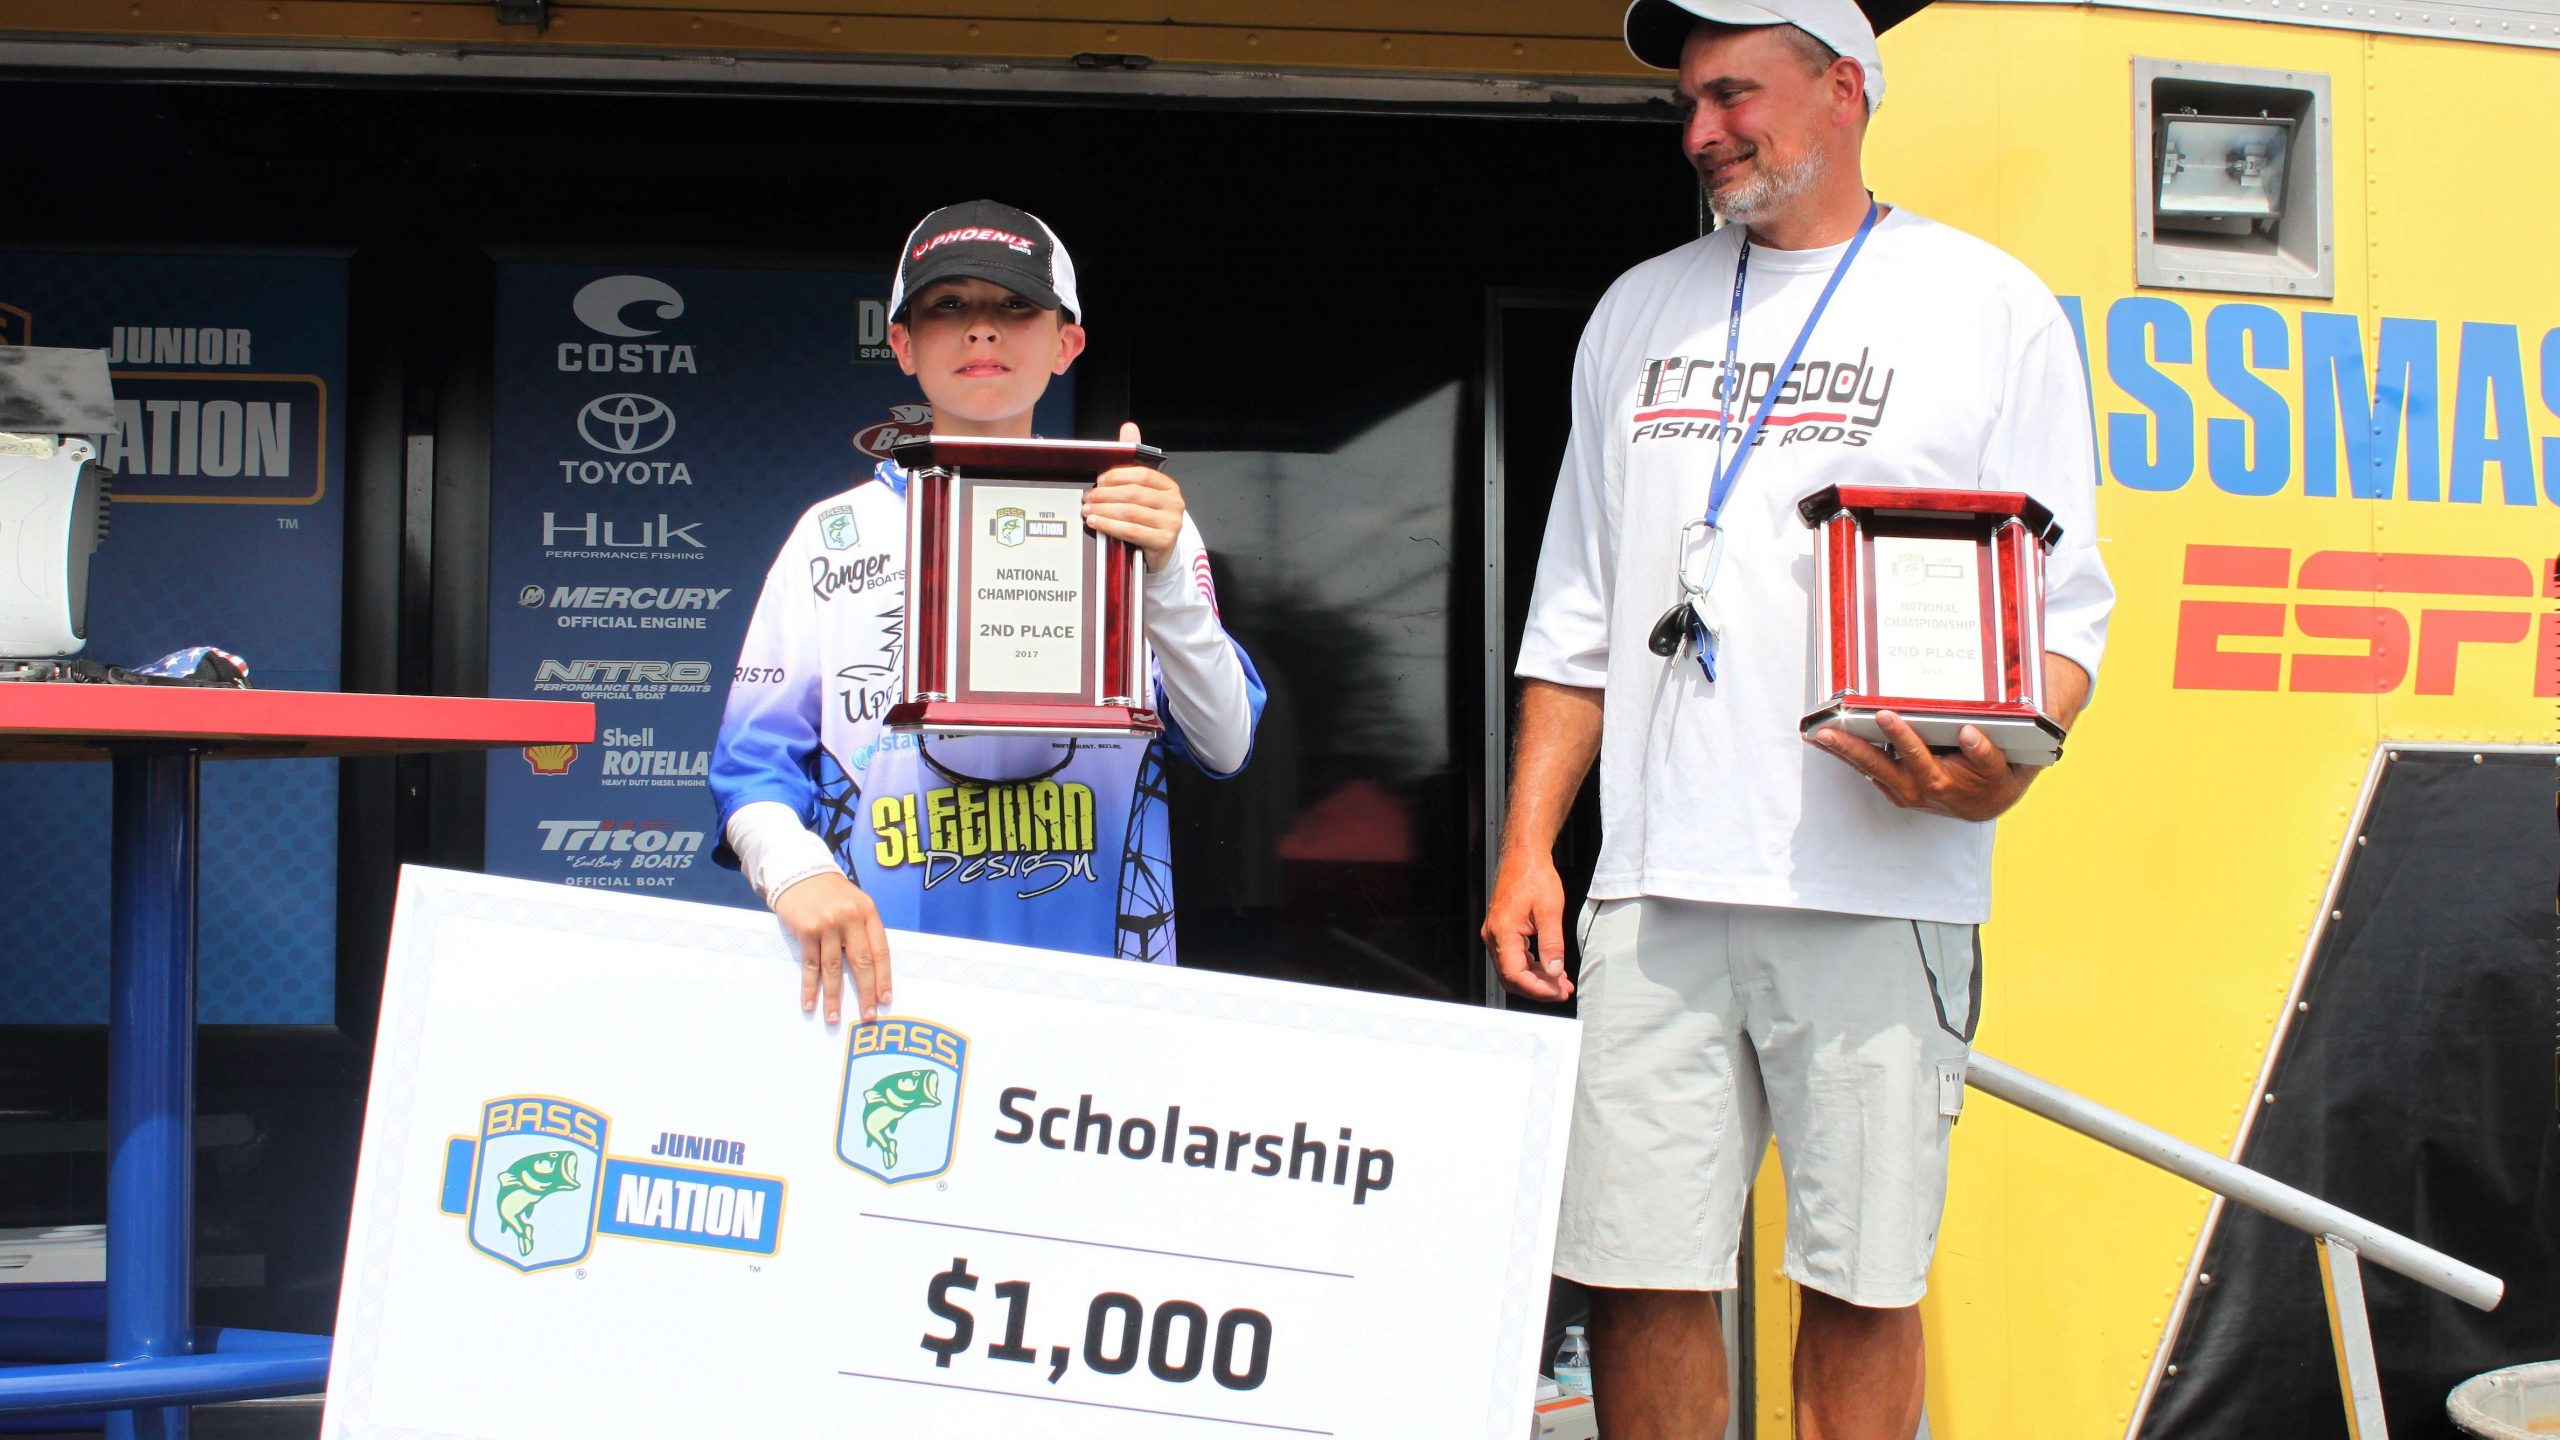 Rein won a $1,000 scholarship for finishing second, and because he fished solo in the championship, he wonât split the prize.
